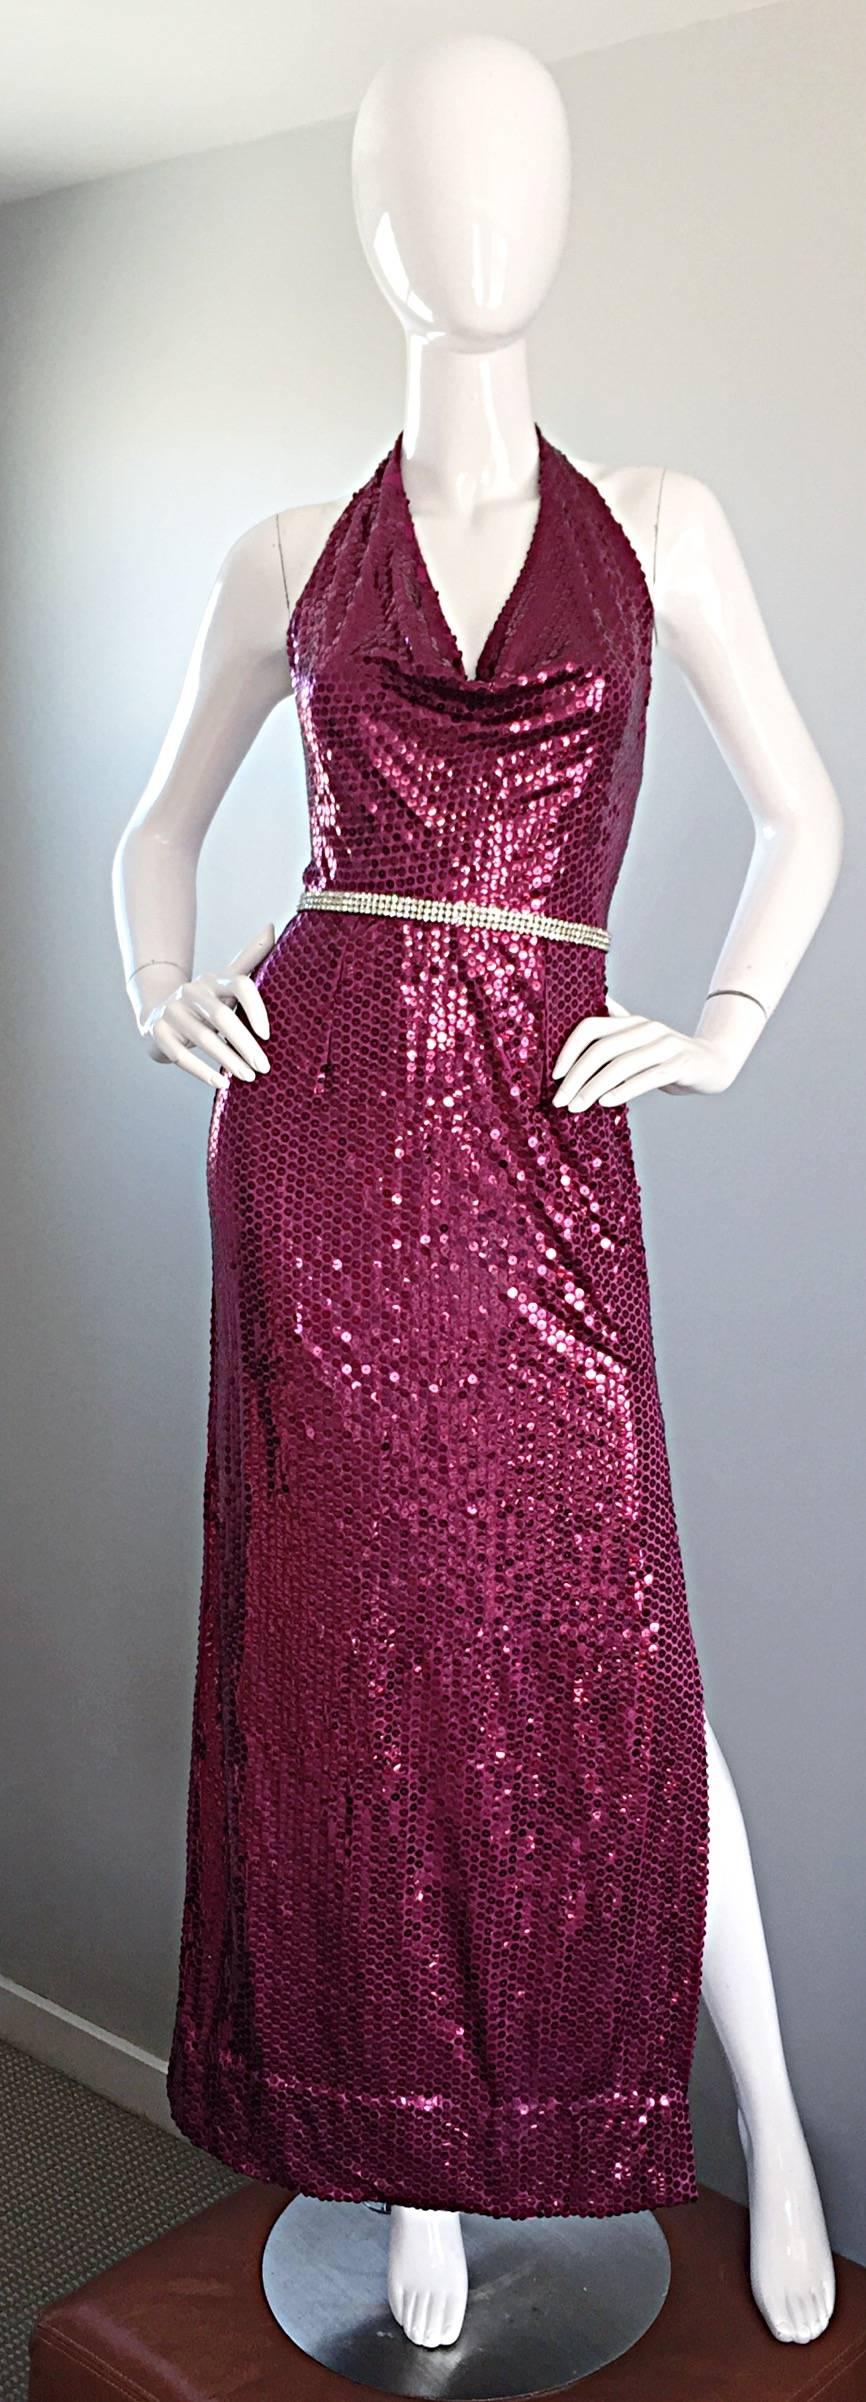 Incredibly sexy 70s vintage LILLIE RUBIN raspberry pink silk sequin disco dress! Features all over hand sewn sequins with an attached rhinestone belt at waist. High slit on the left side reveals just the right amount of leg. Super flattering body